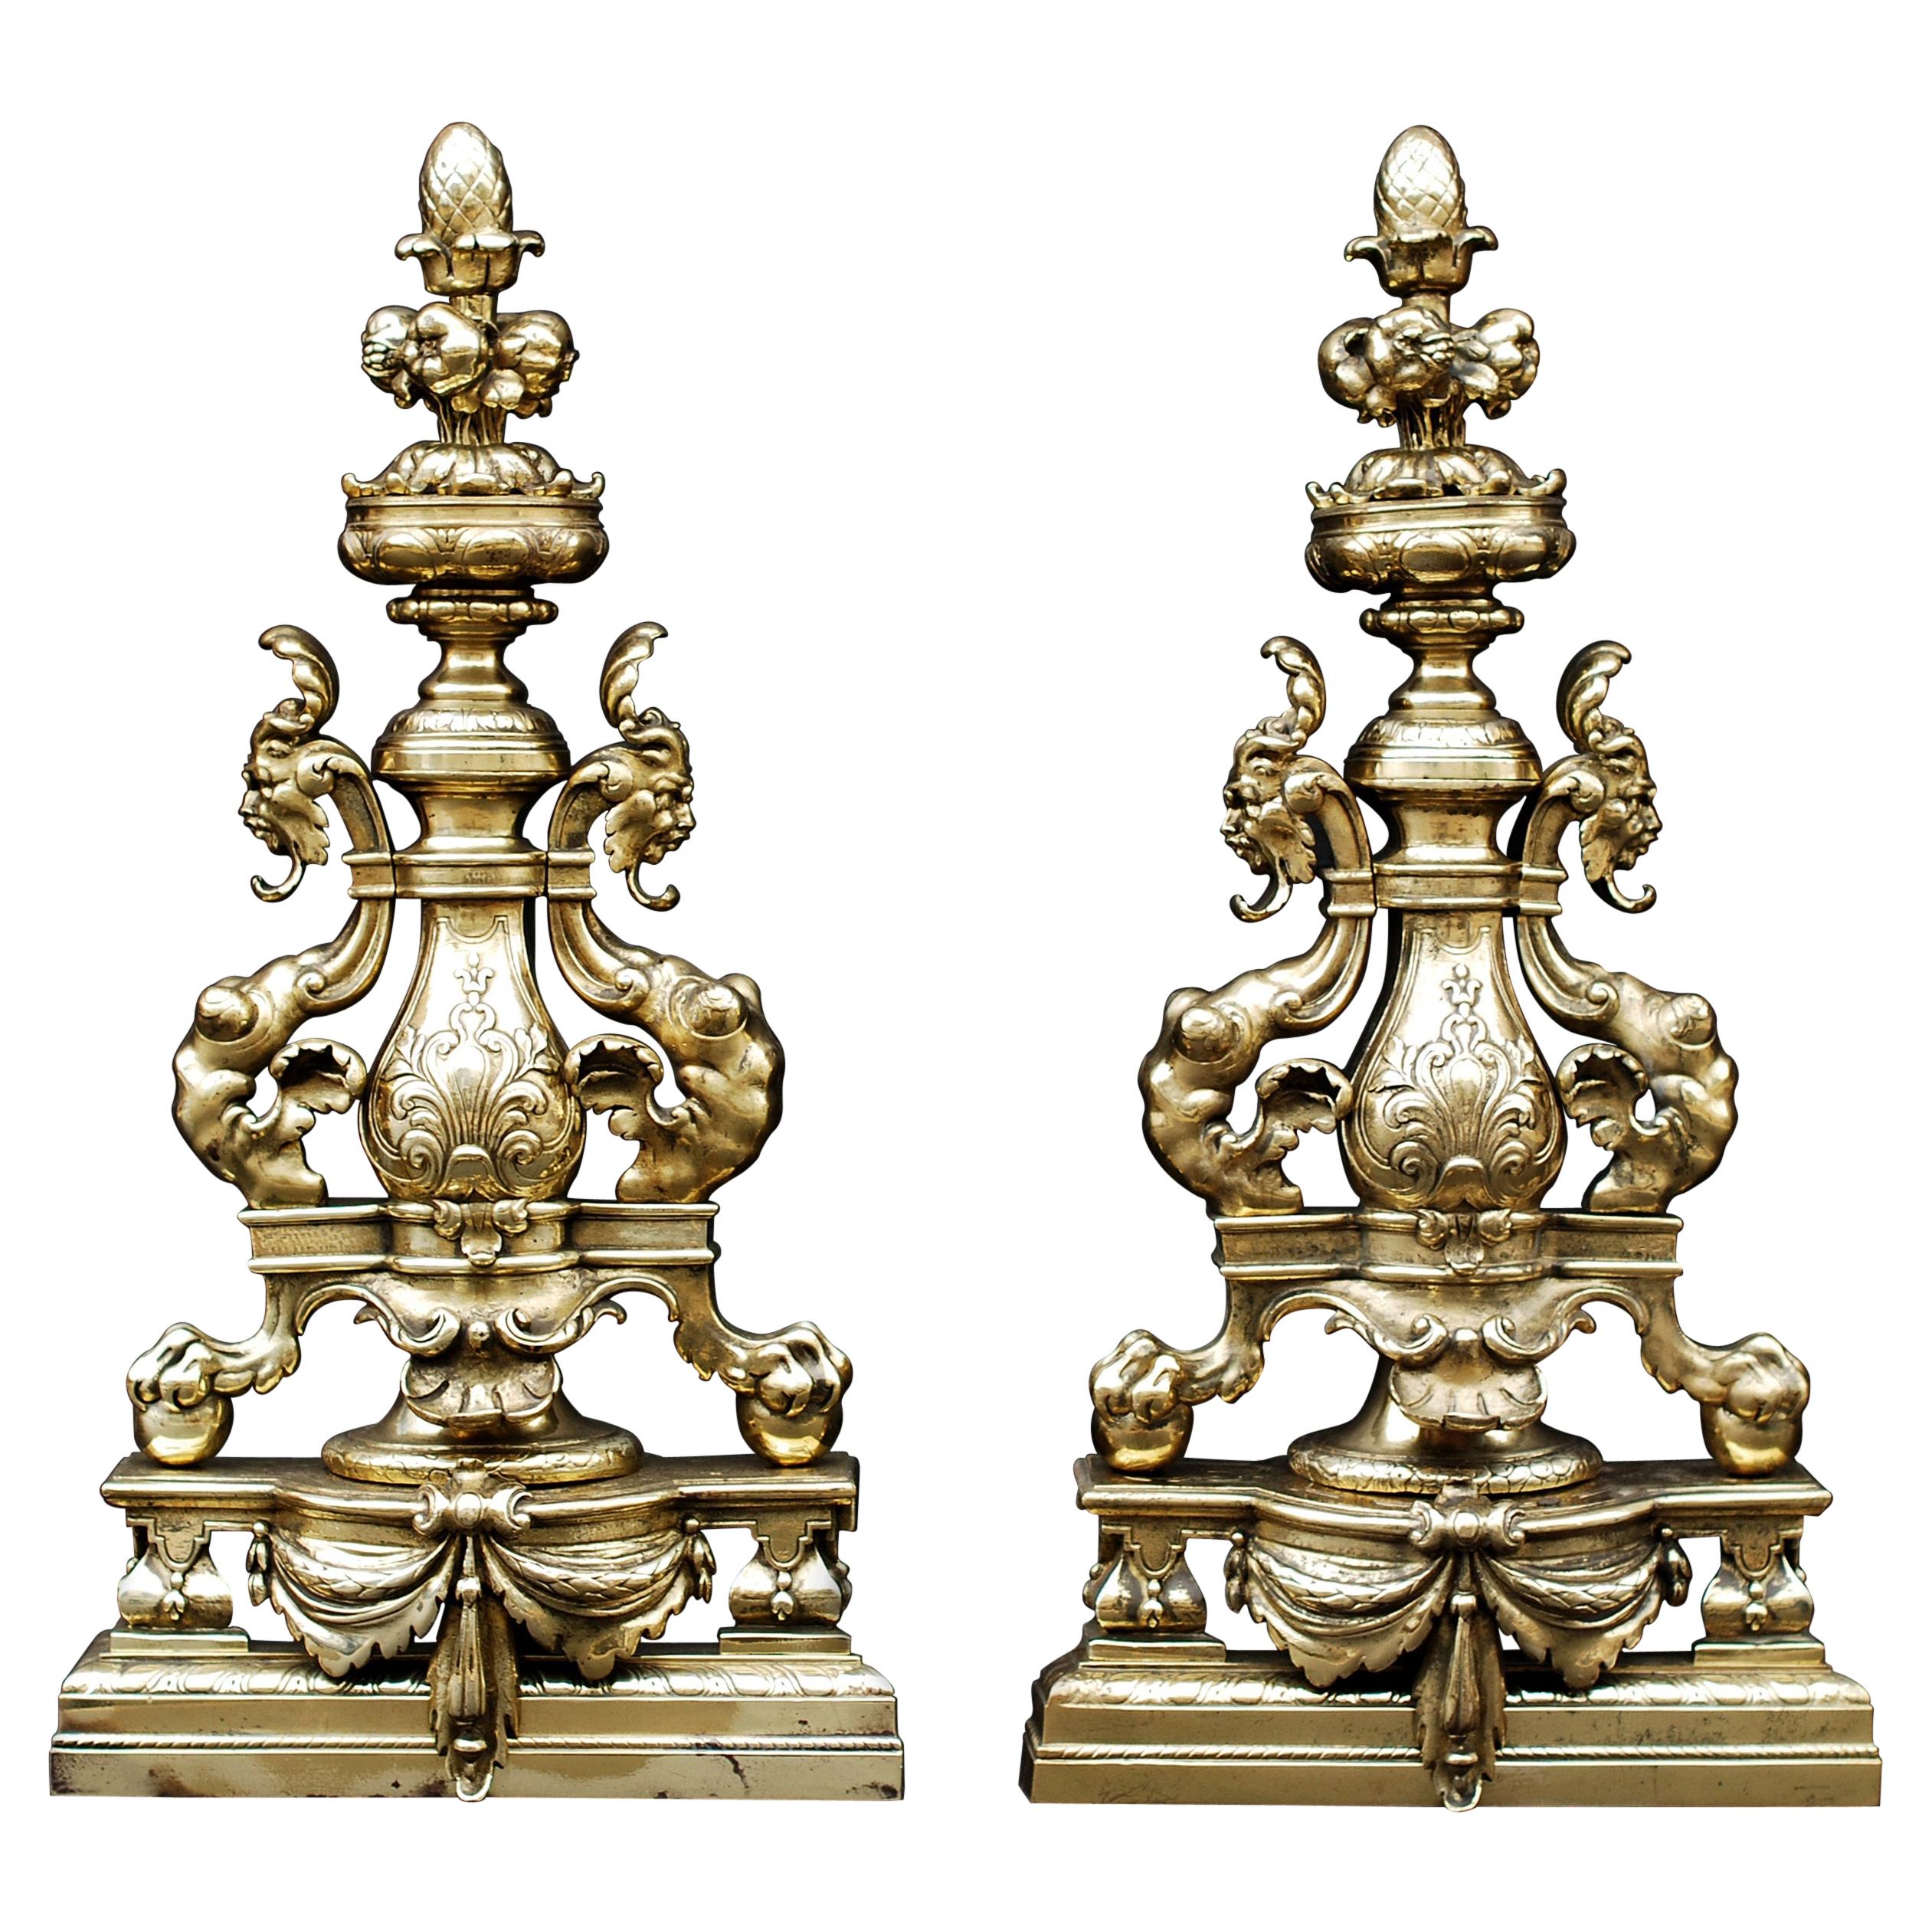 Pair of Ornate English 19th Century Andirons For Sale